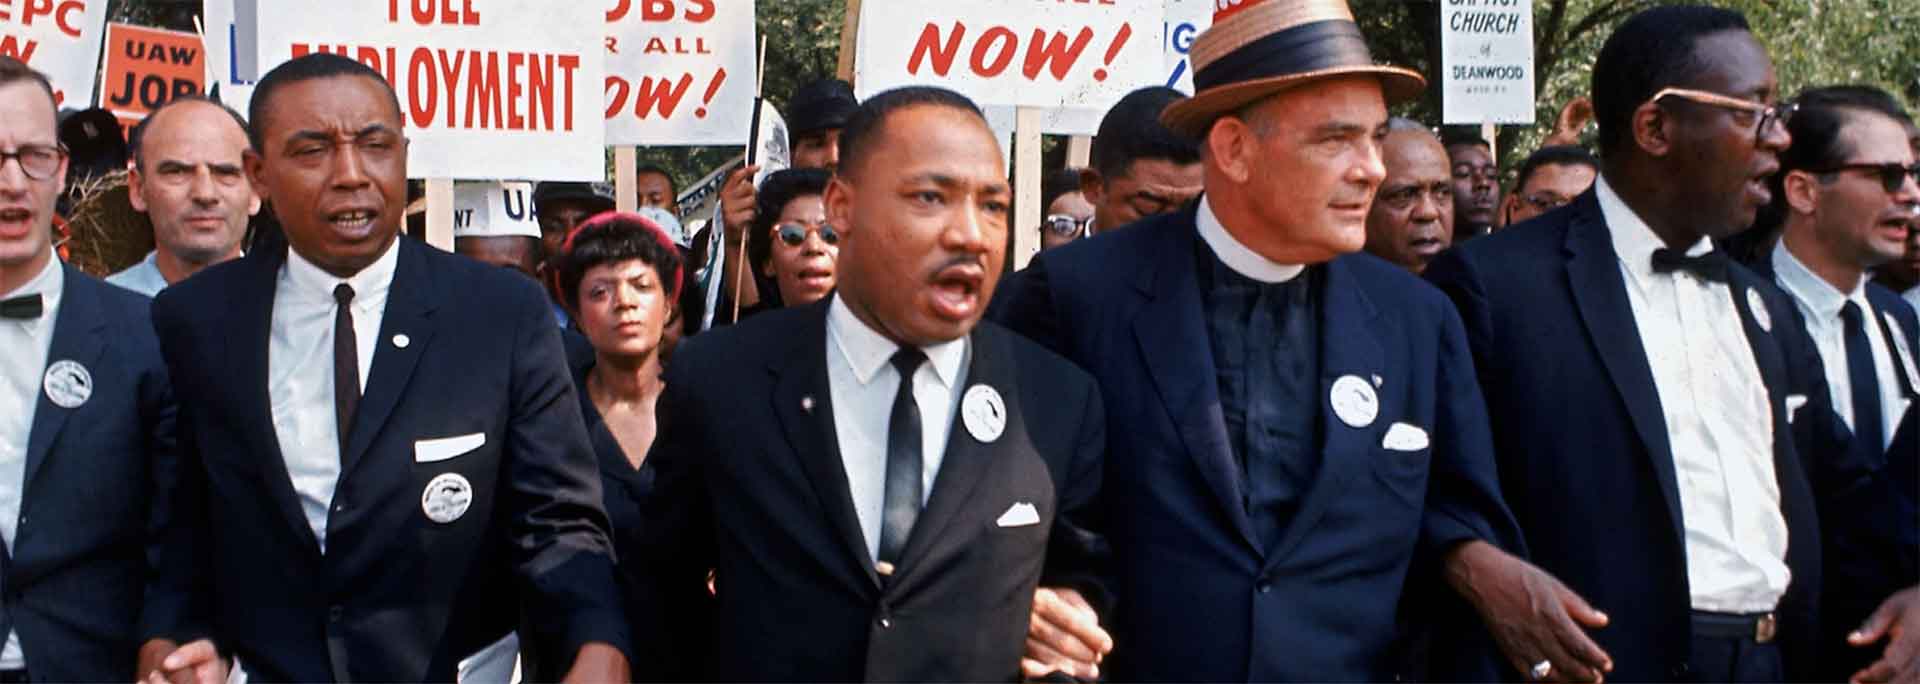 
		MLK marching with protestors.		